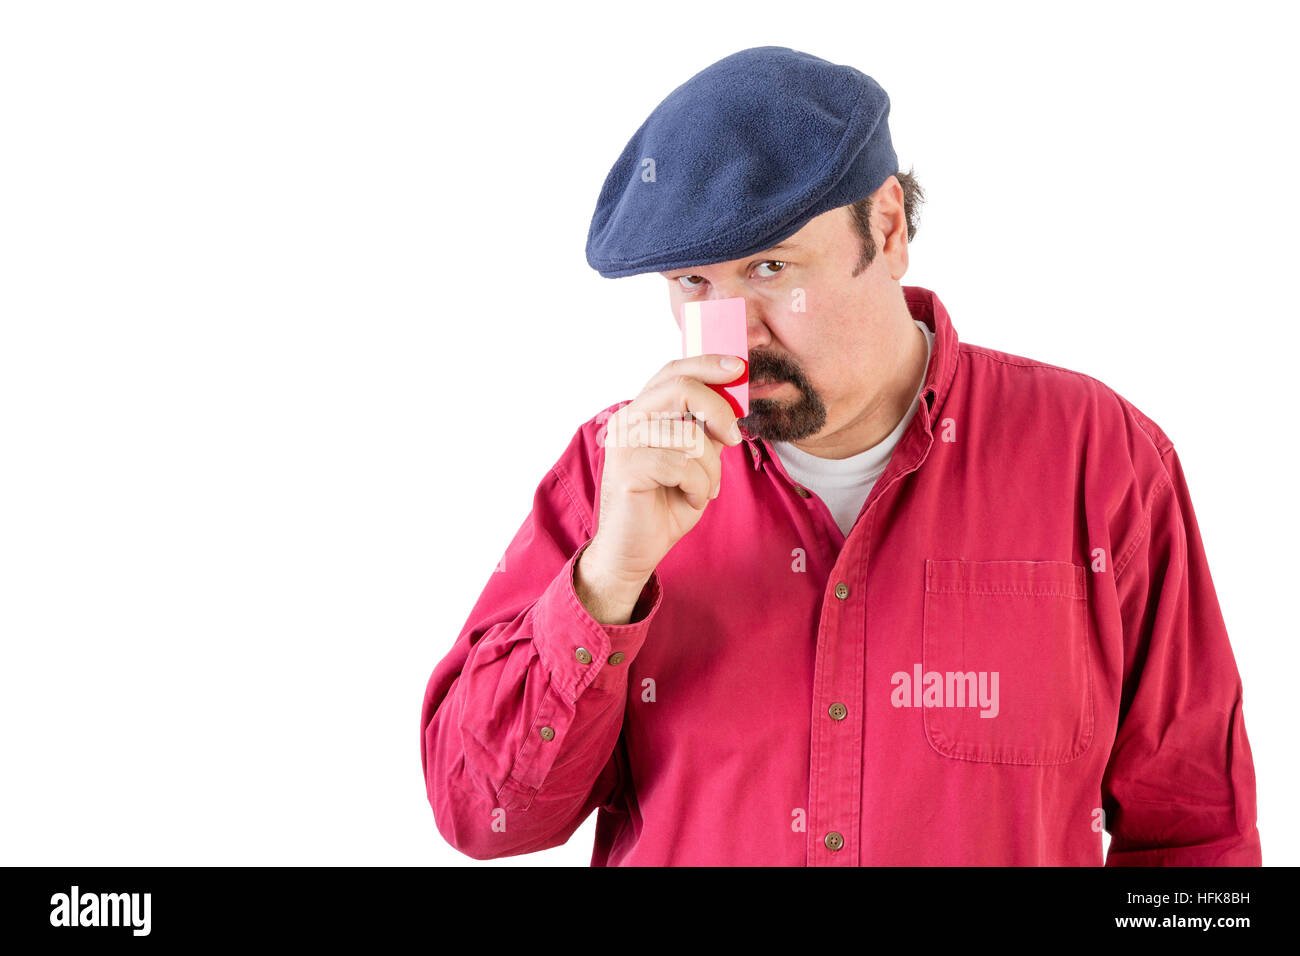 Suspicious middle-aged man wearing a cloth cap peering over his credit card with a speculative watchful expression as he holds it to his nose Stock Photo